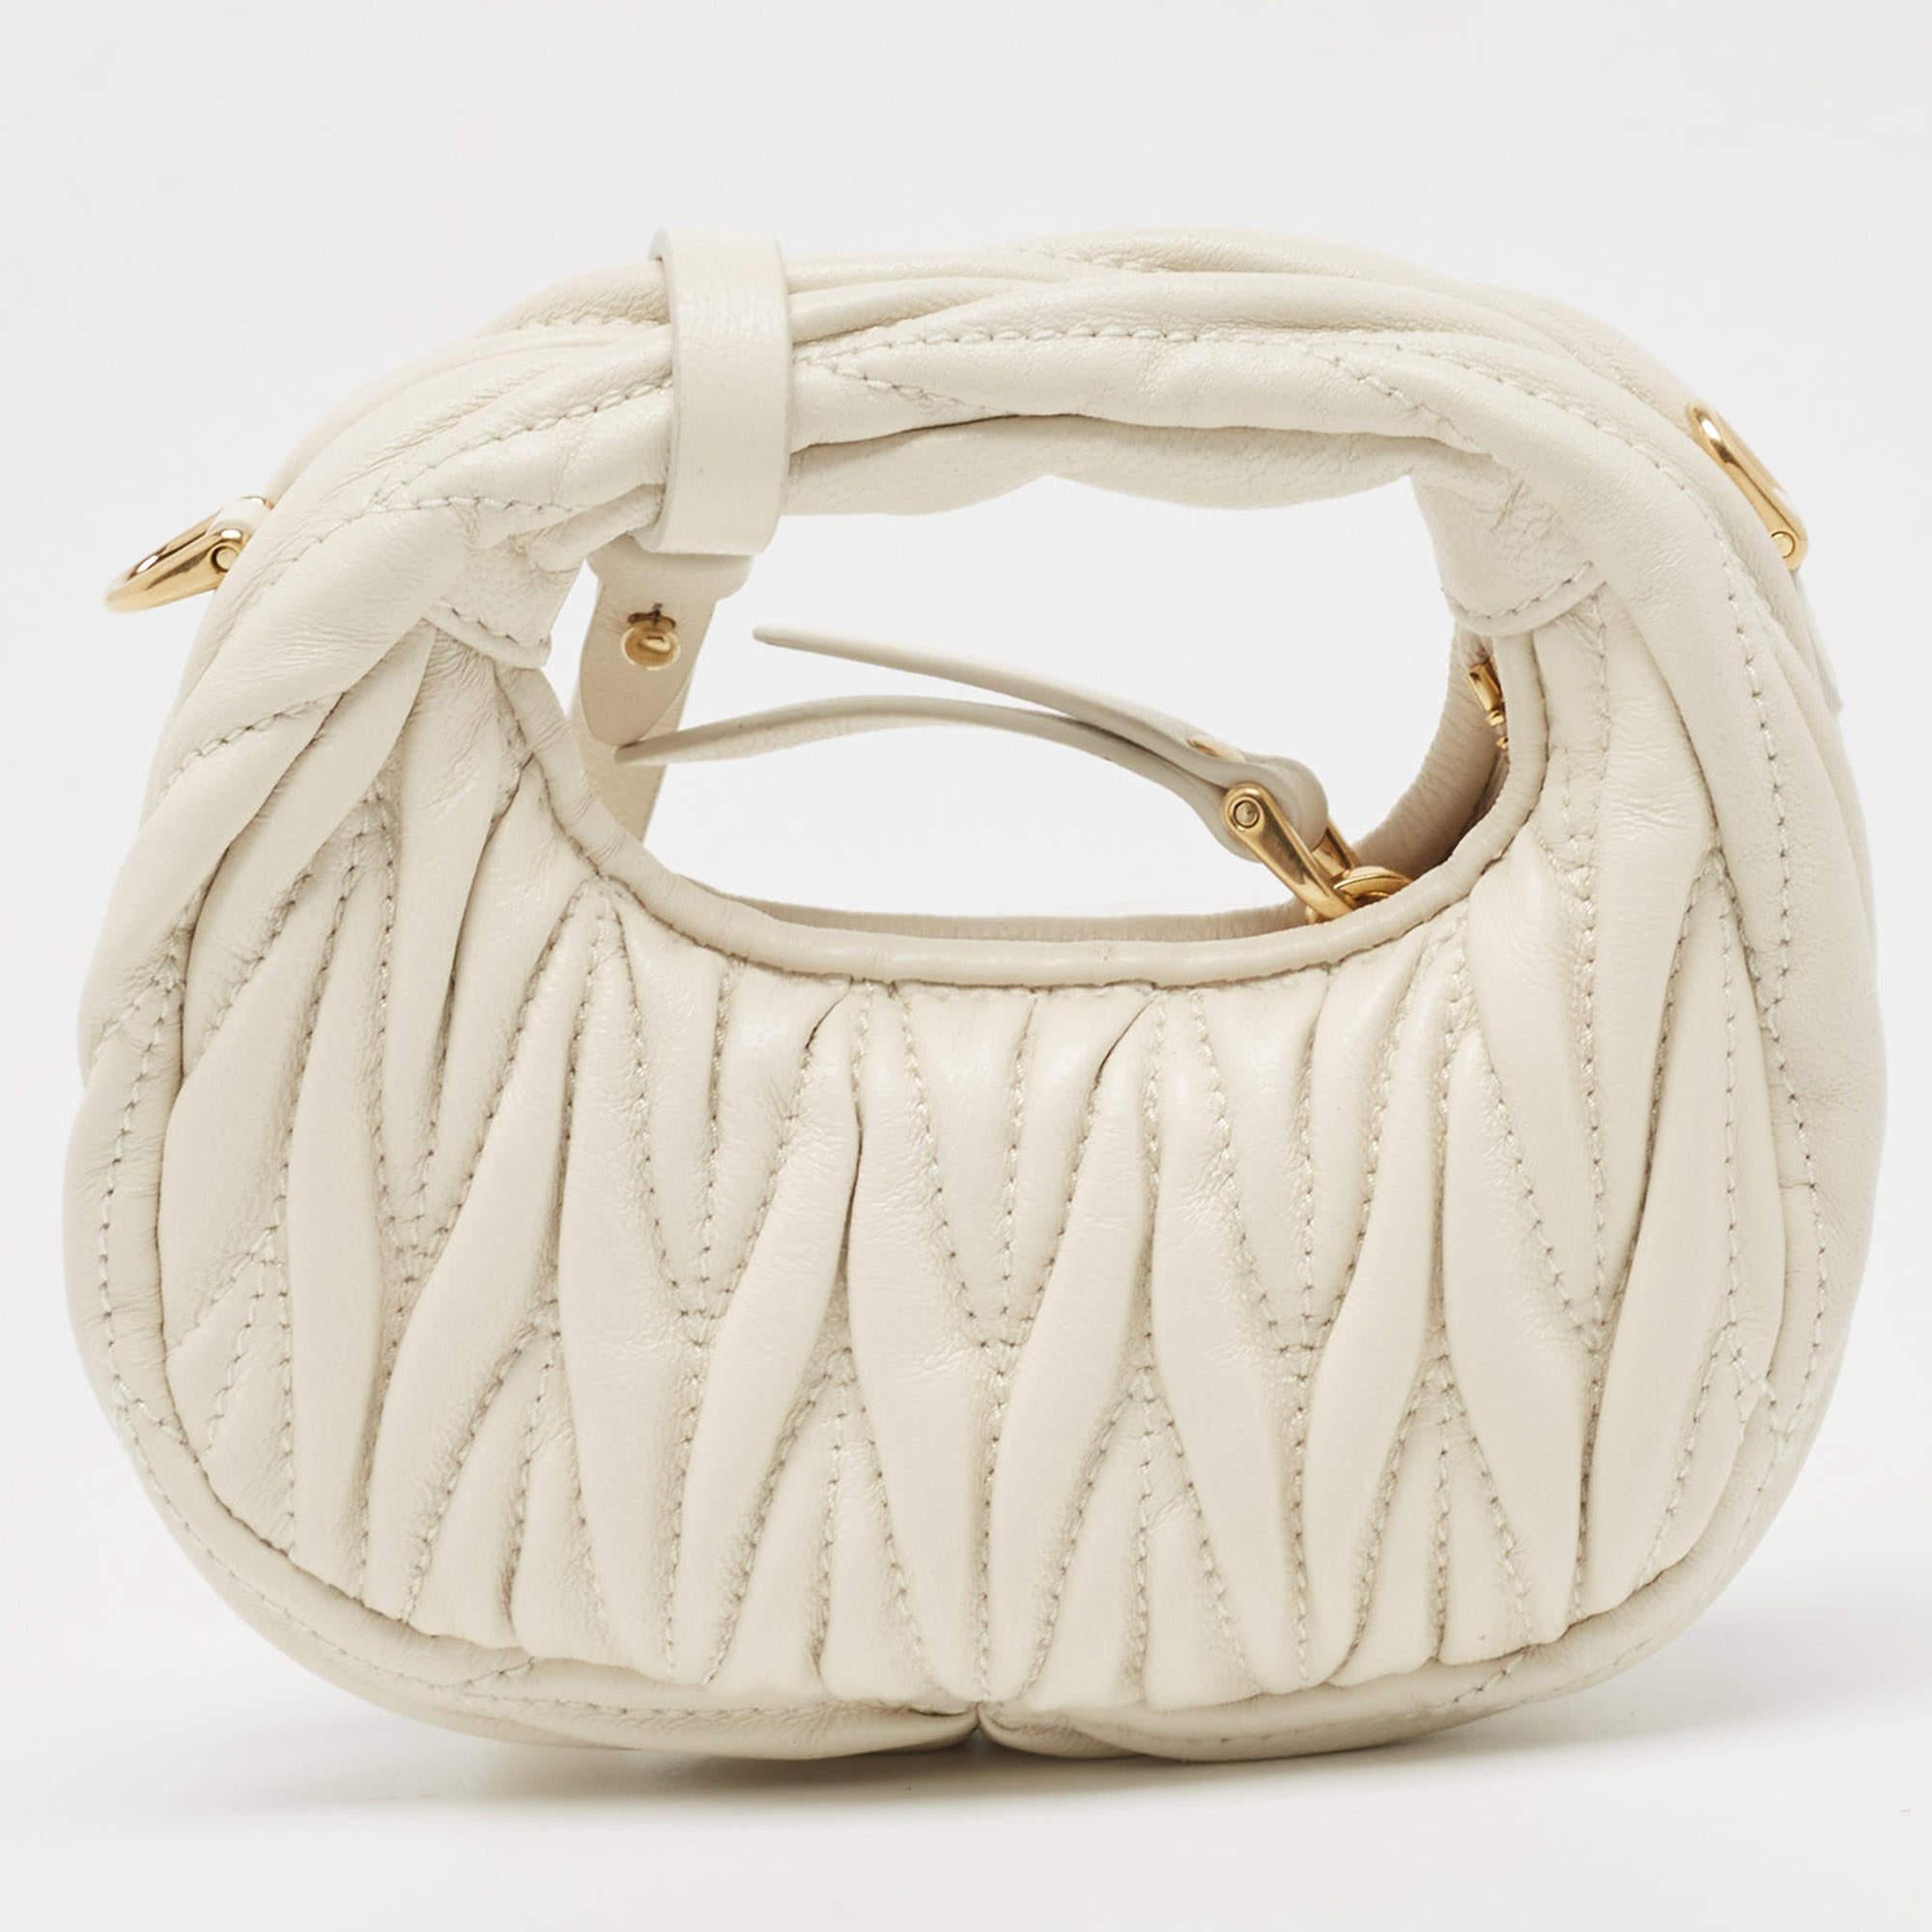 Crafted by Miu Miu, this Wander crossbody bag exudes effortless charm. Its compact design features intricate quilting, showcasing meticulous craftsmanship. The versatile crossbody style offers convenience, while the soft leather construction adds a